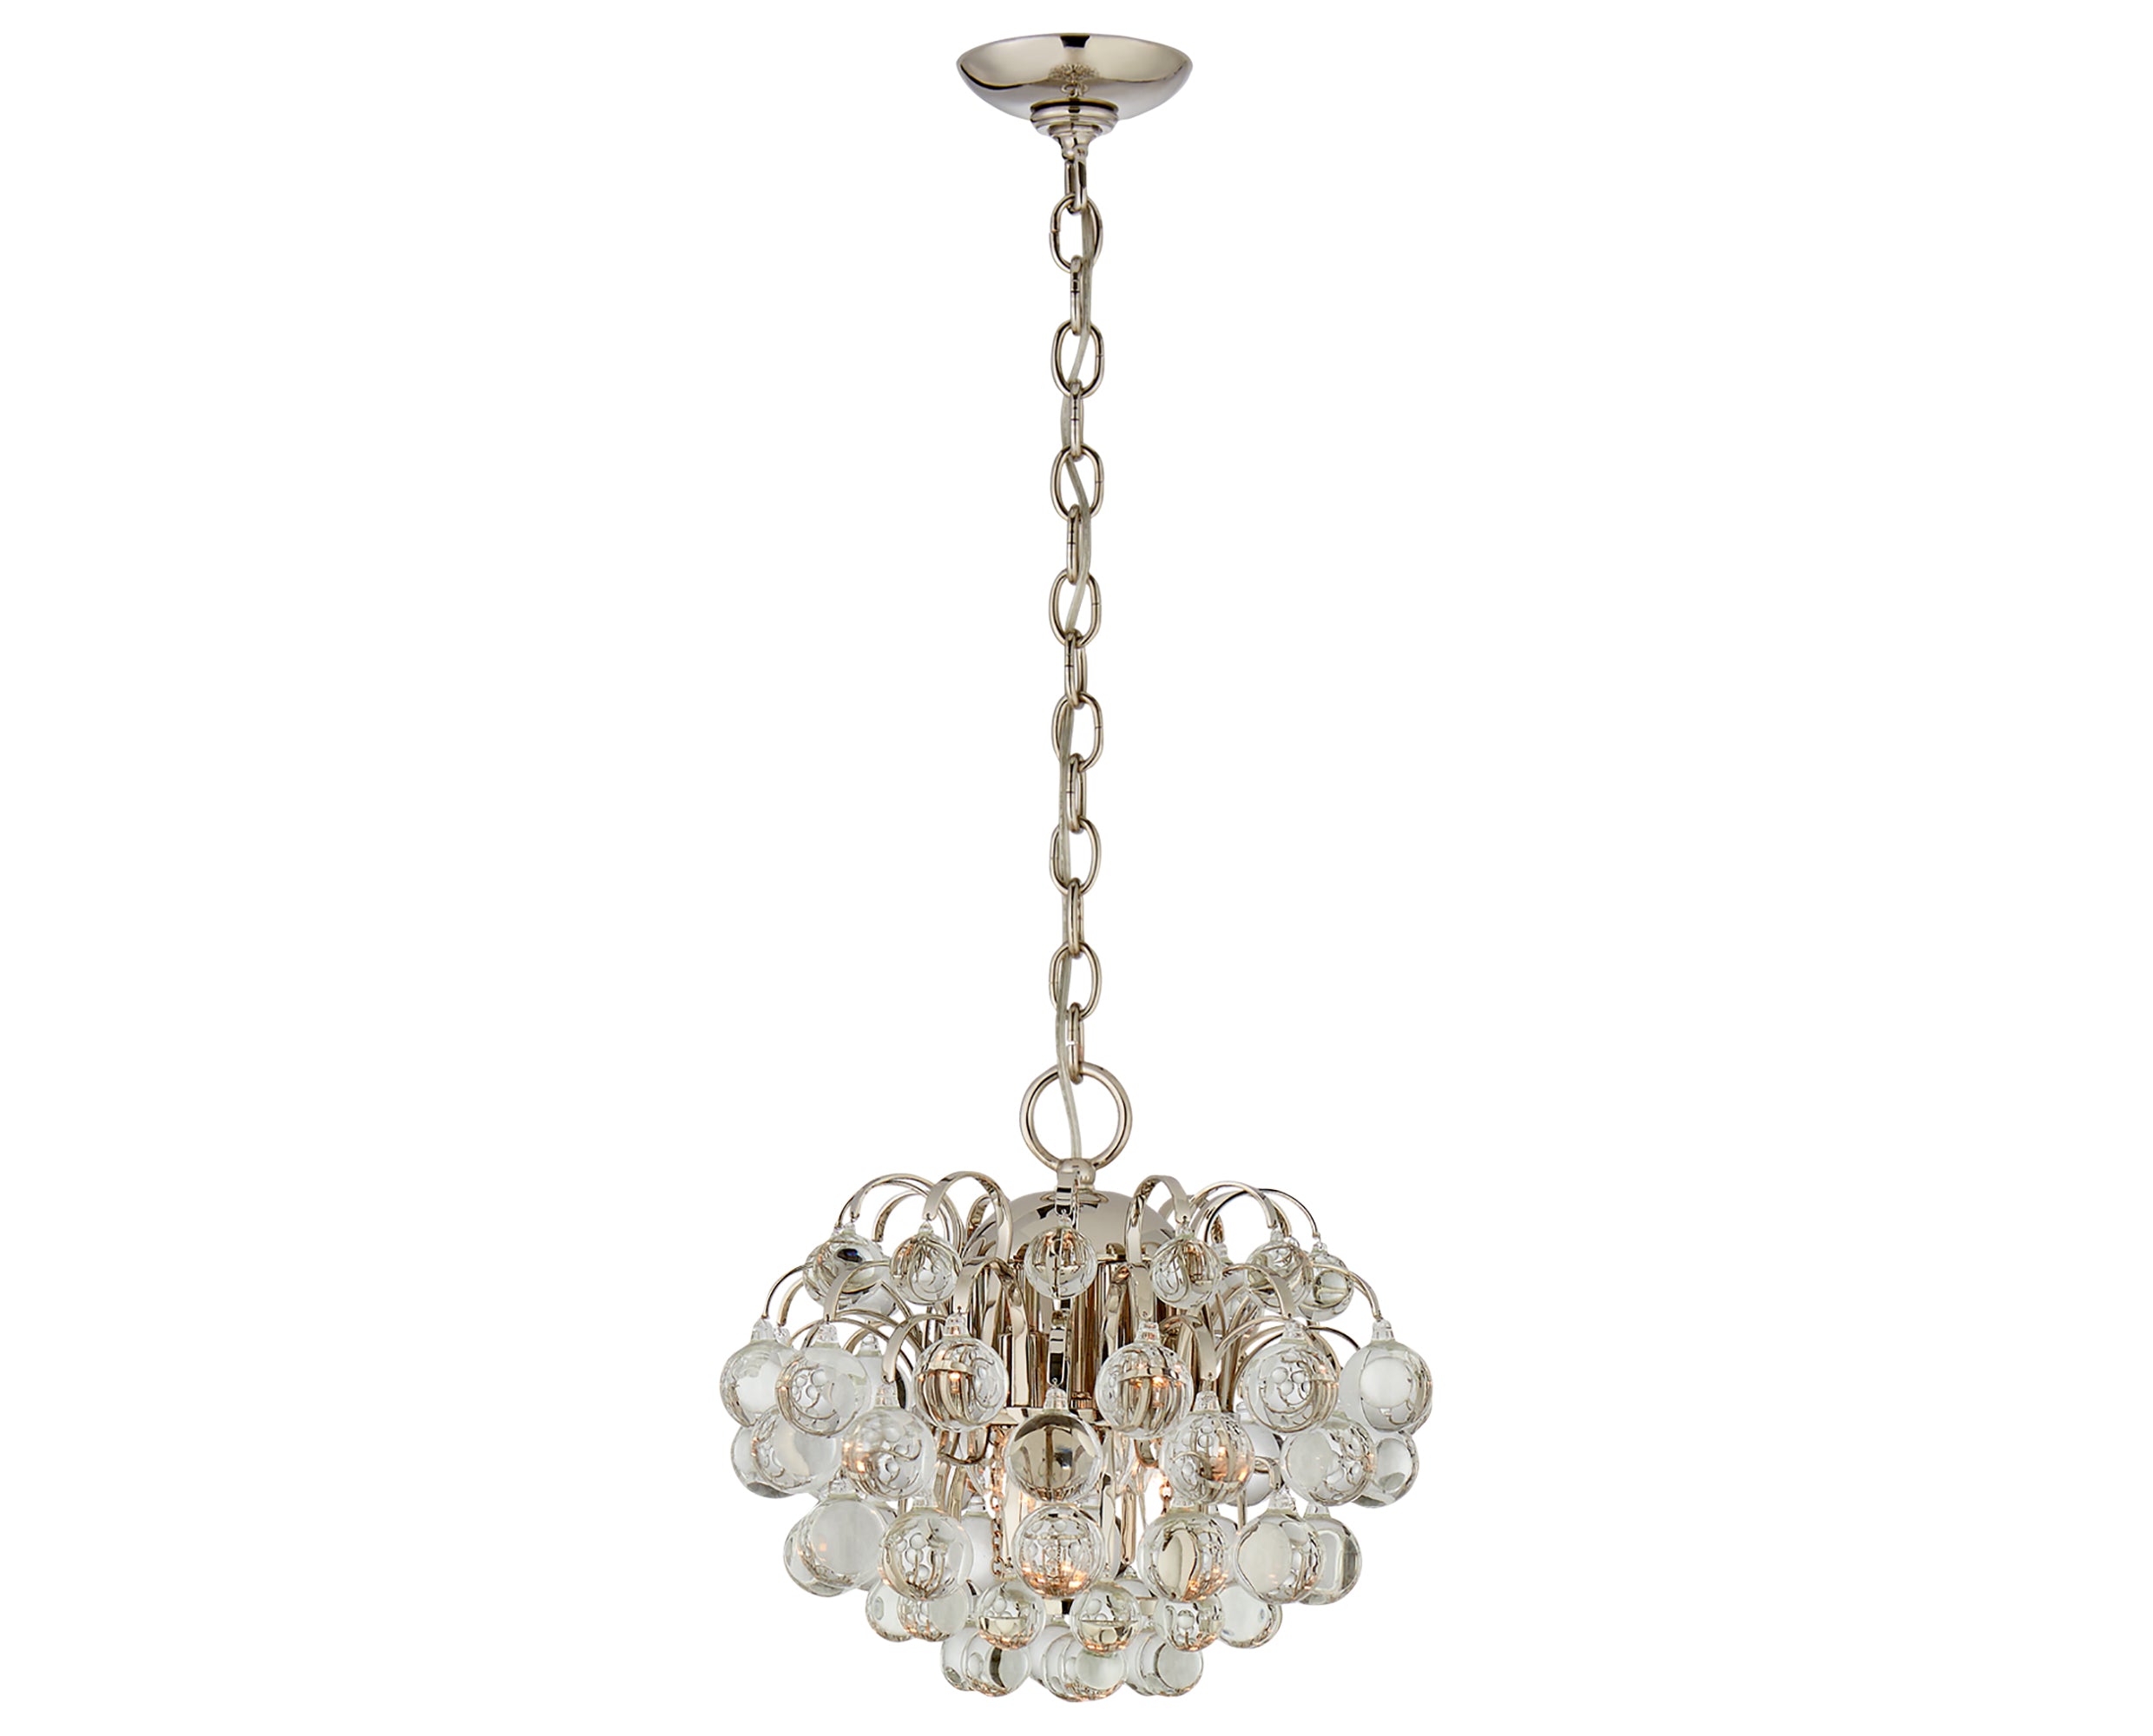 Polished Nickel &amp; Crystal Glass | Bellvale Small Chandelier | Valley Ridge Furniture